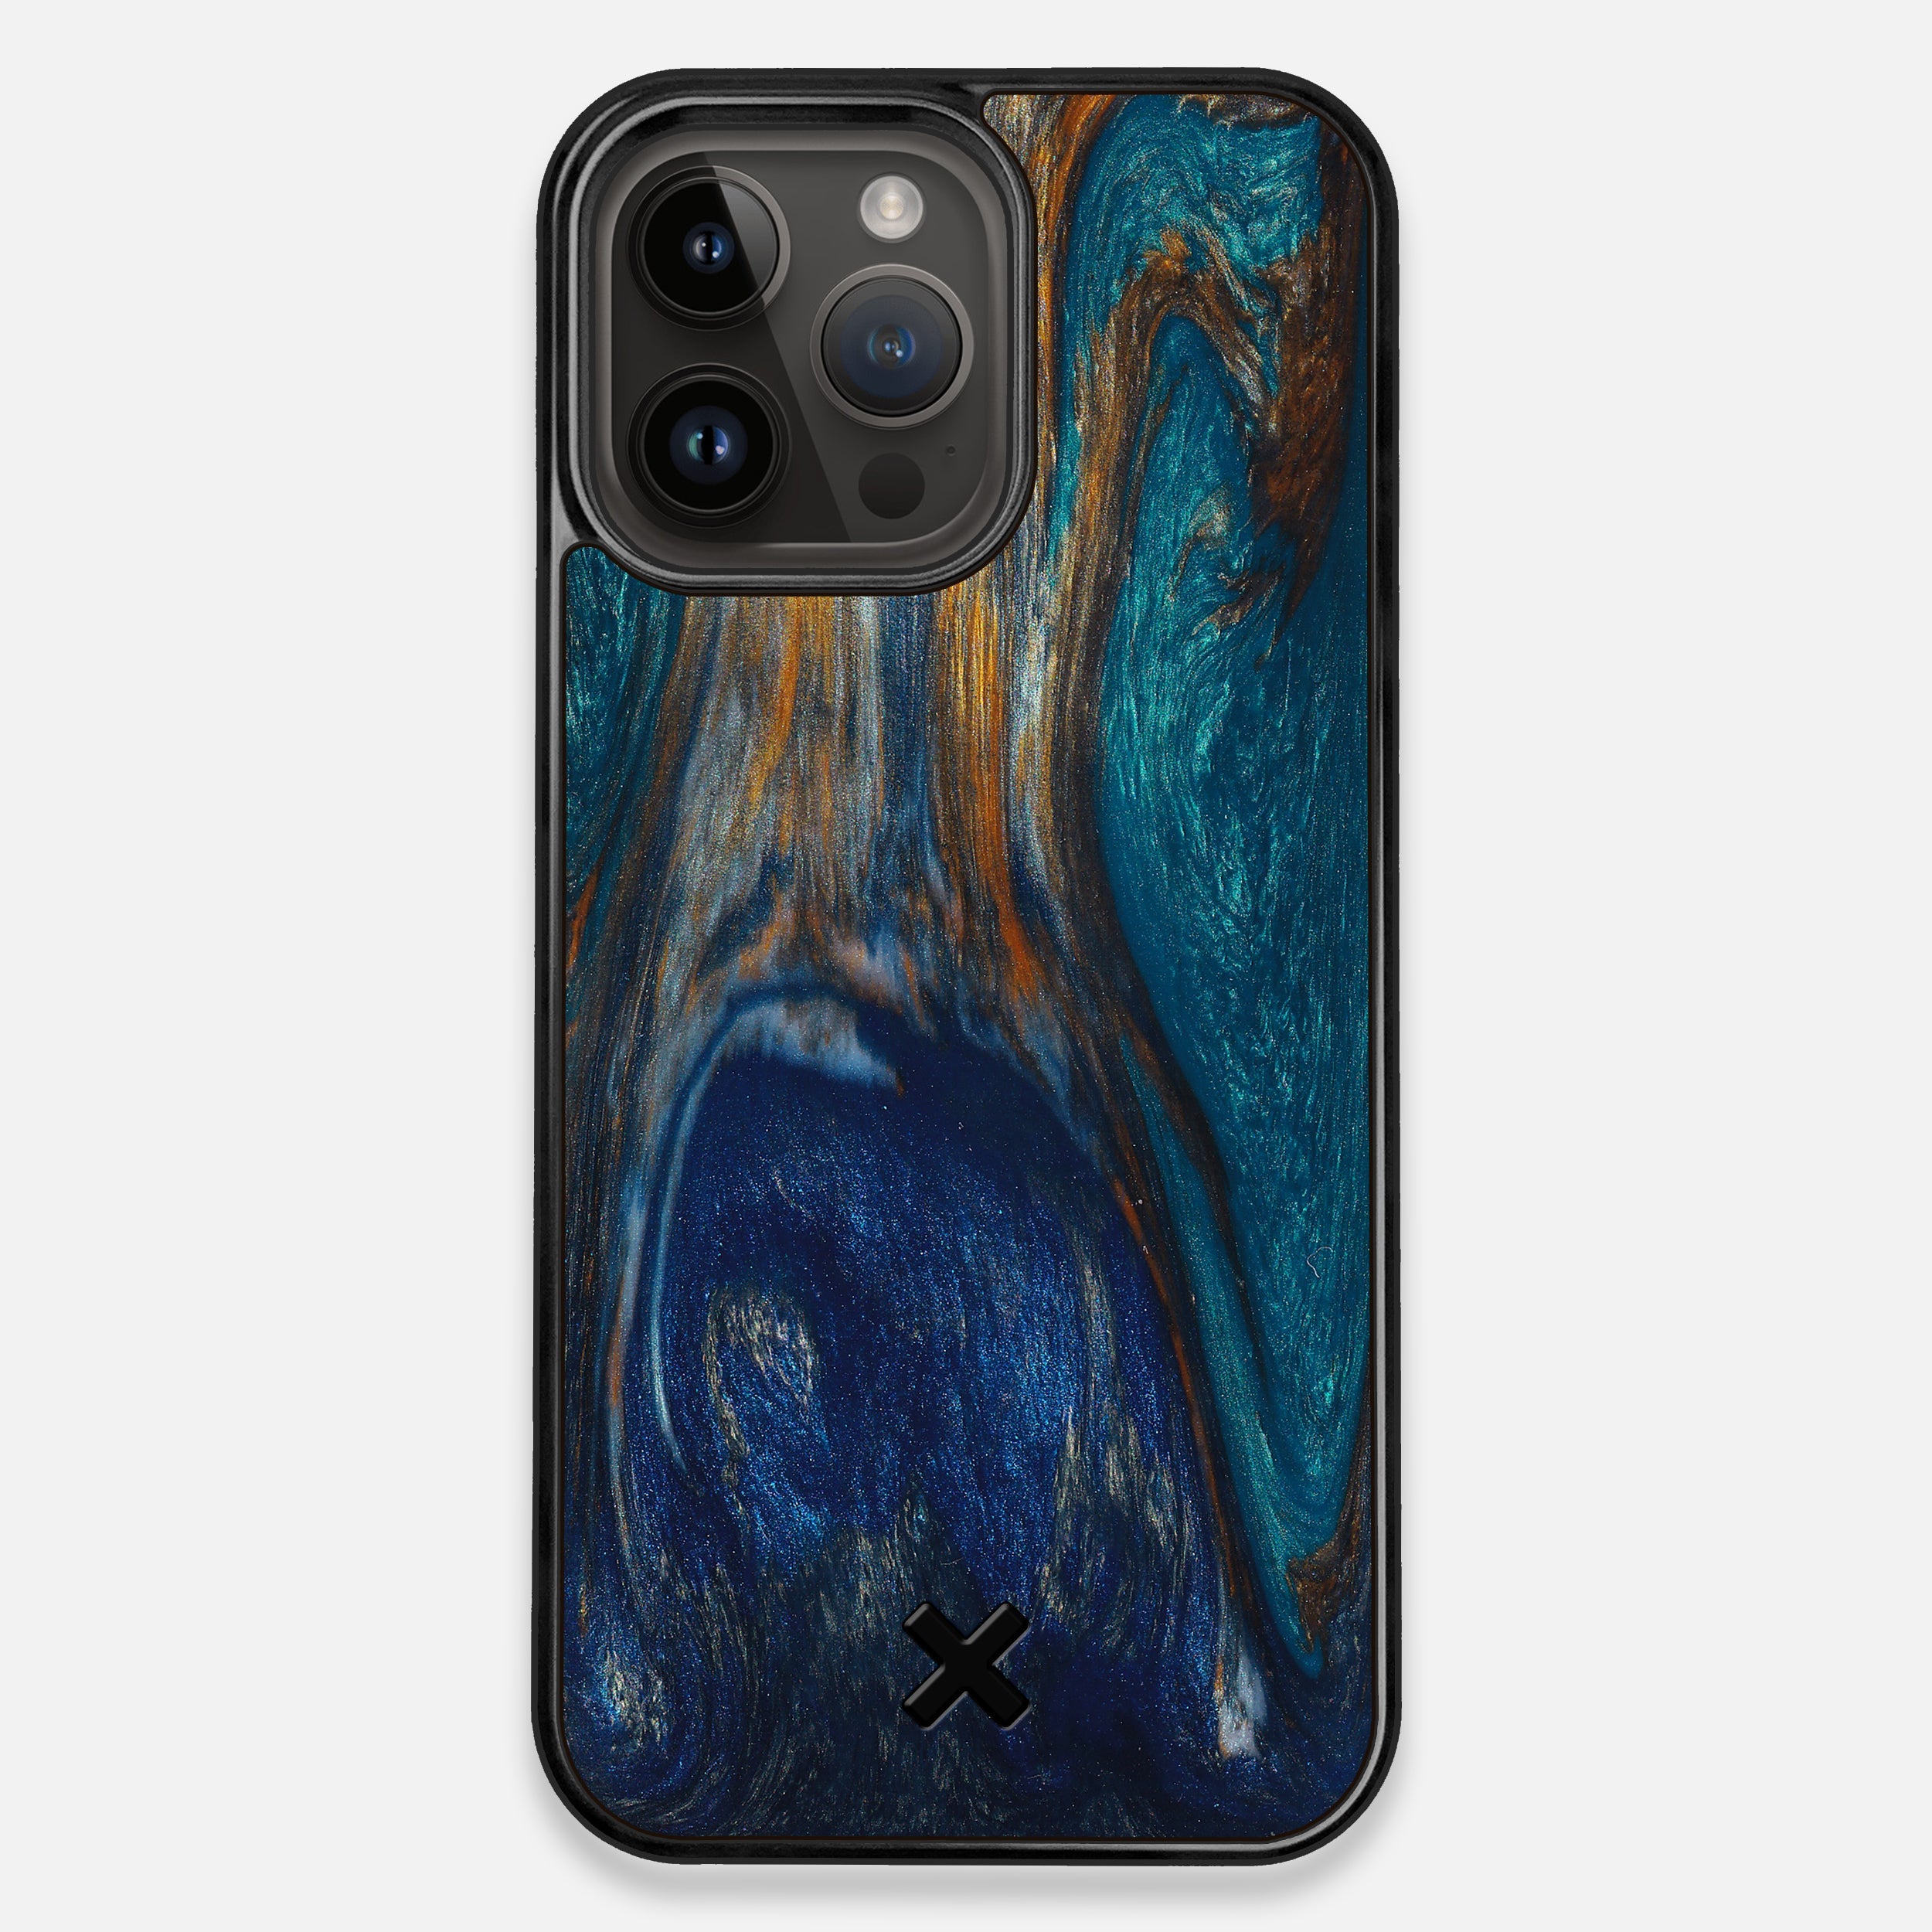 One & Only - Wood and Resin Case - #01619